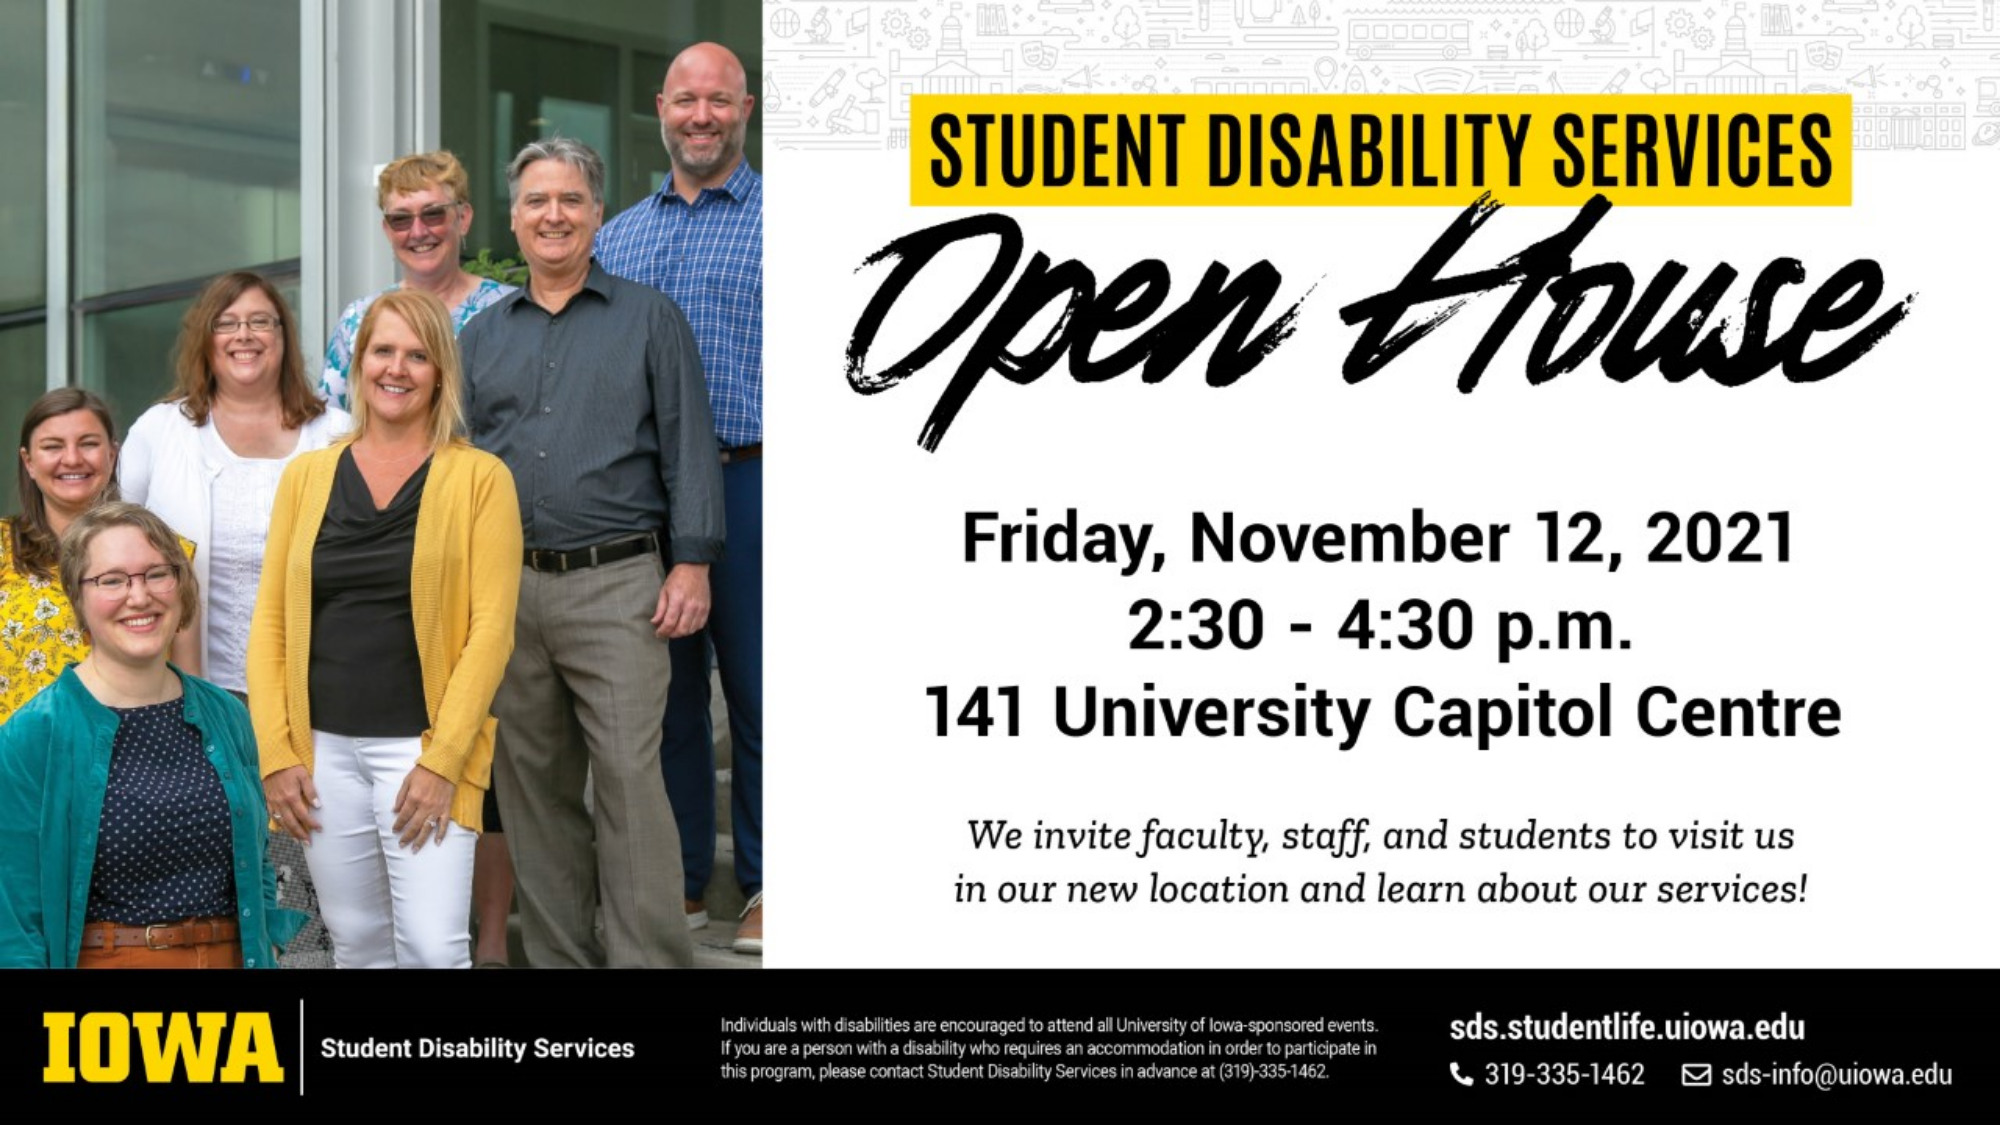 Student Disability Services Open House. Friday Nov. 12 from 2:30 - 4:30 in 141 University Capitol Centre